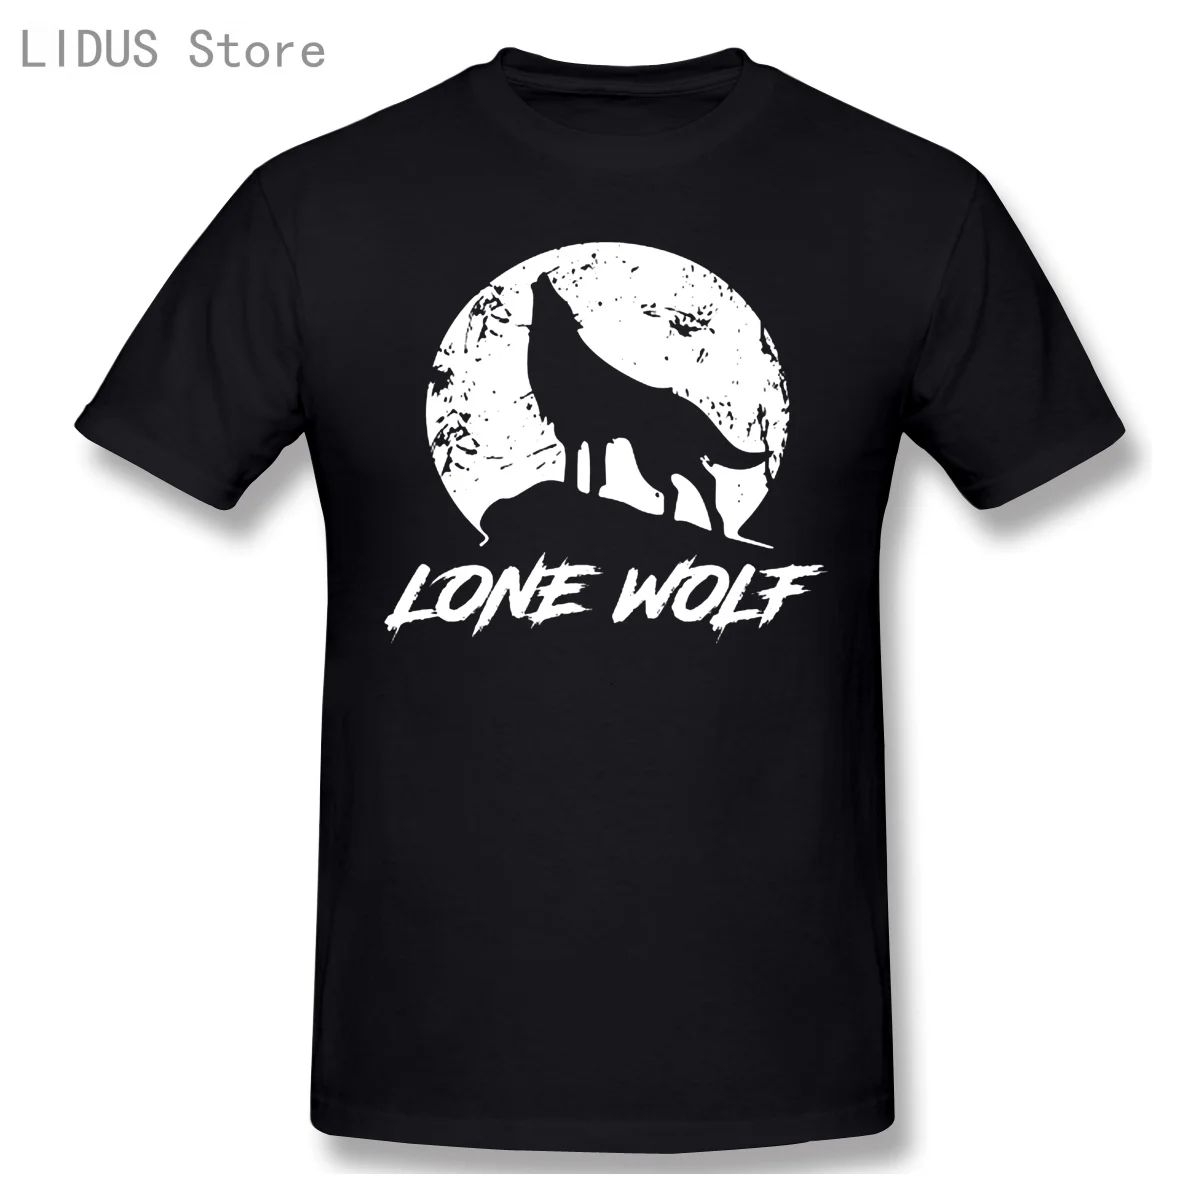 

T Shirt 2020 Howling Lone Wolf On Moon Short Sleeve Casual Men O-neck 100% Cotton Tshirts Tee Top